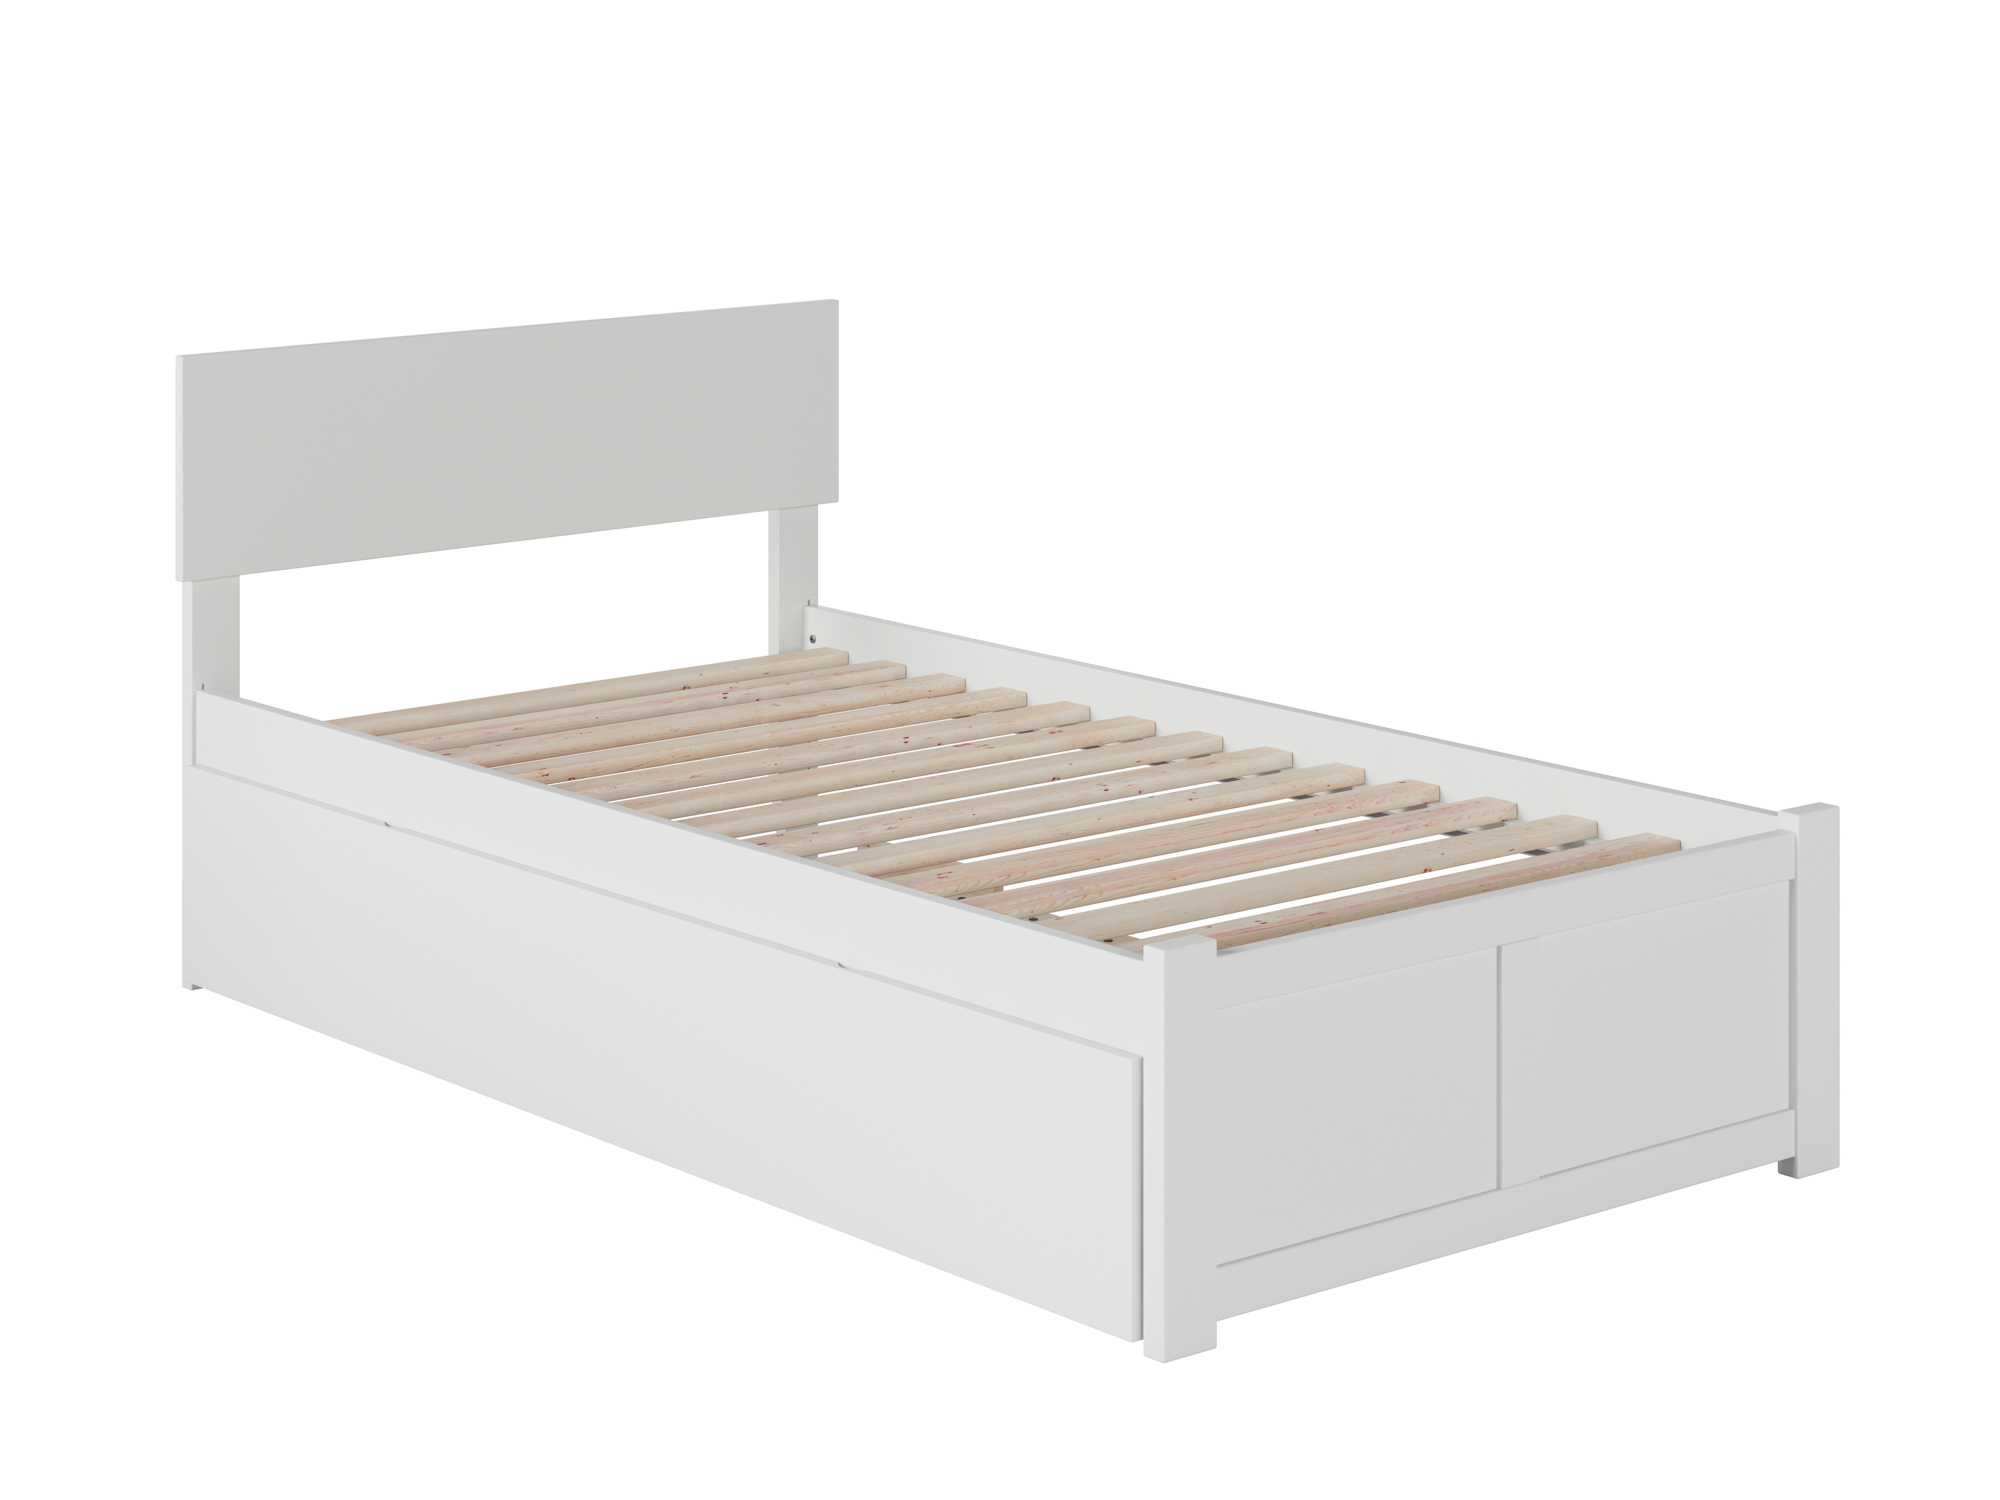 Orlando Twin Extra Long Bed with Footboard and Twin Extra Long Trundle in White - image 1 of 8